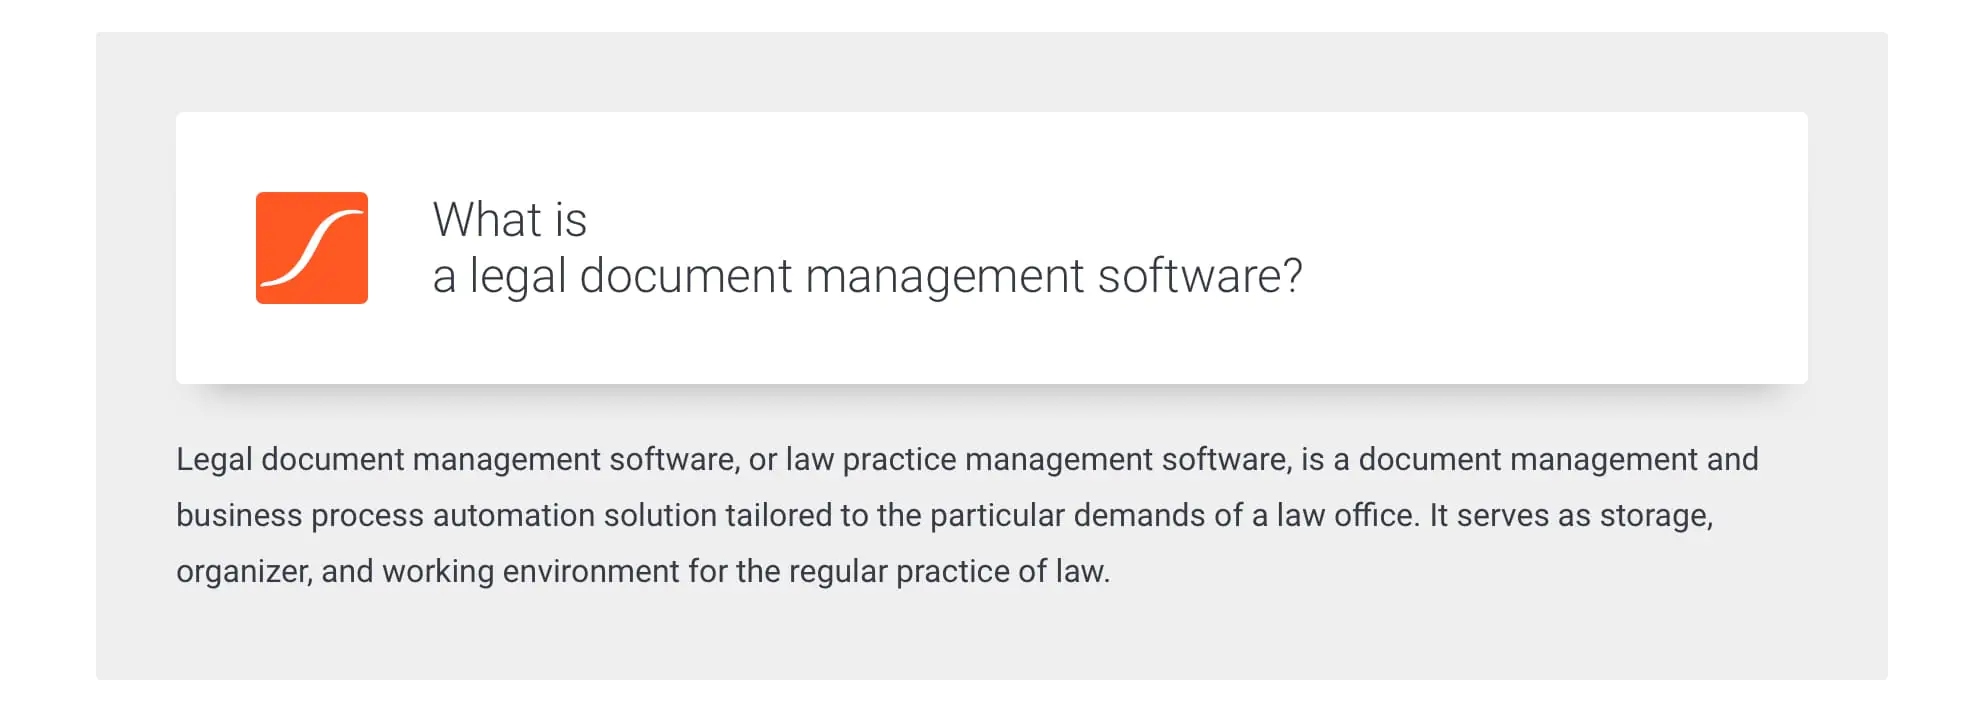 What is a legal document management system